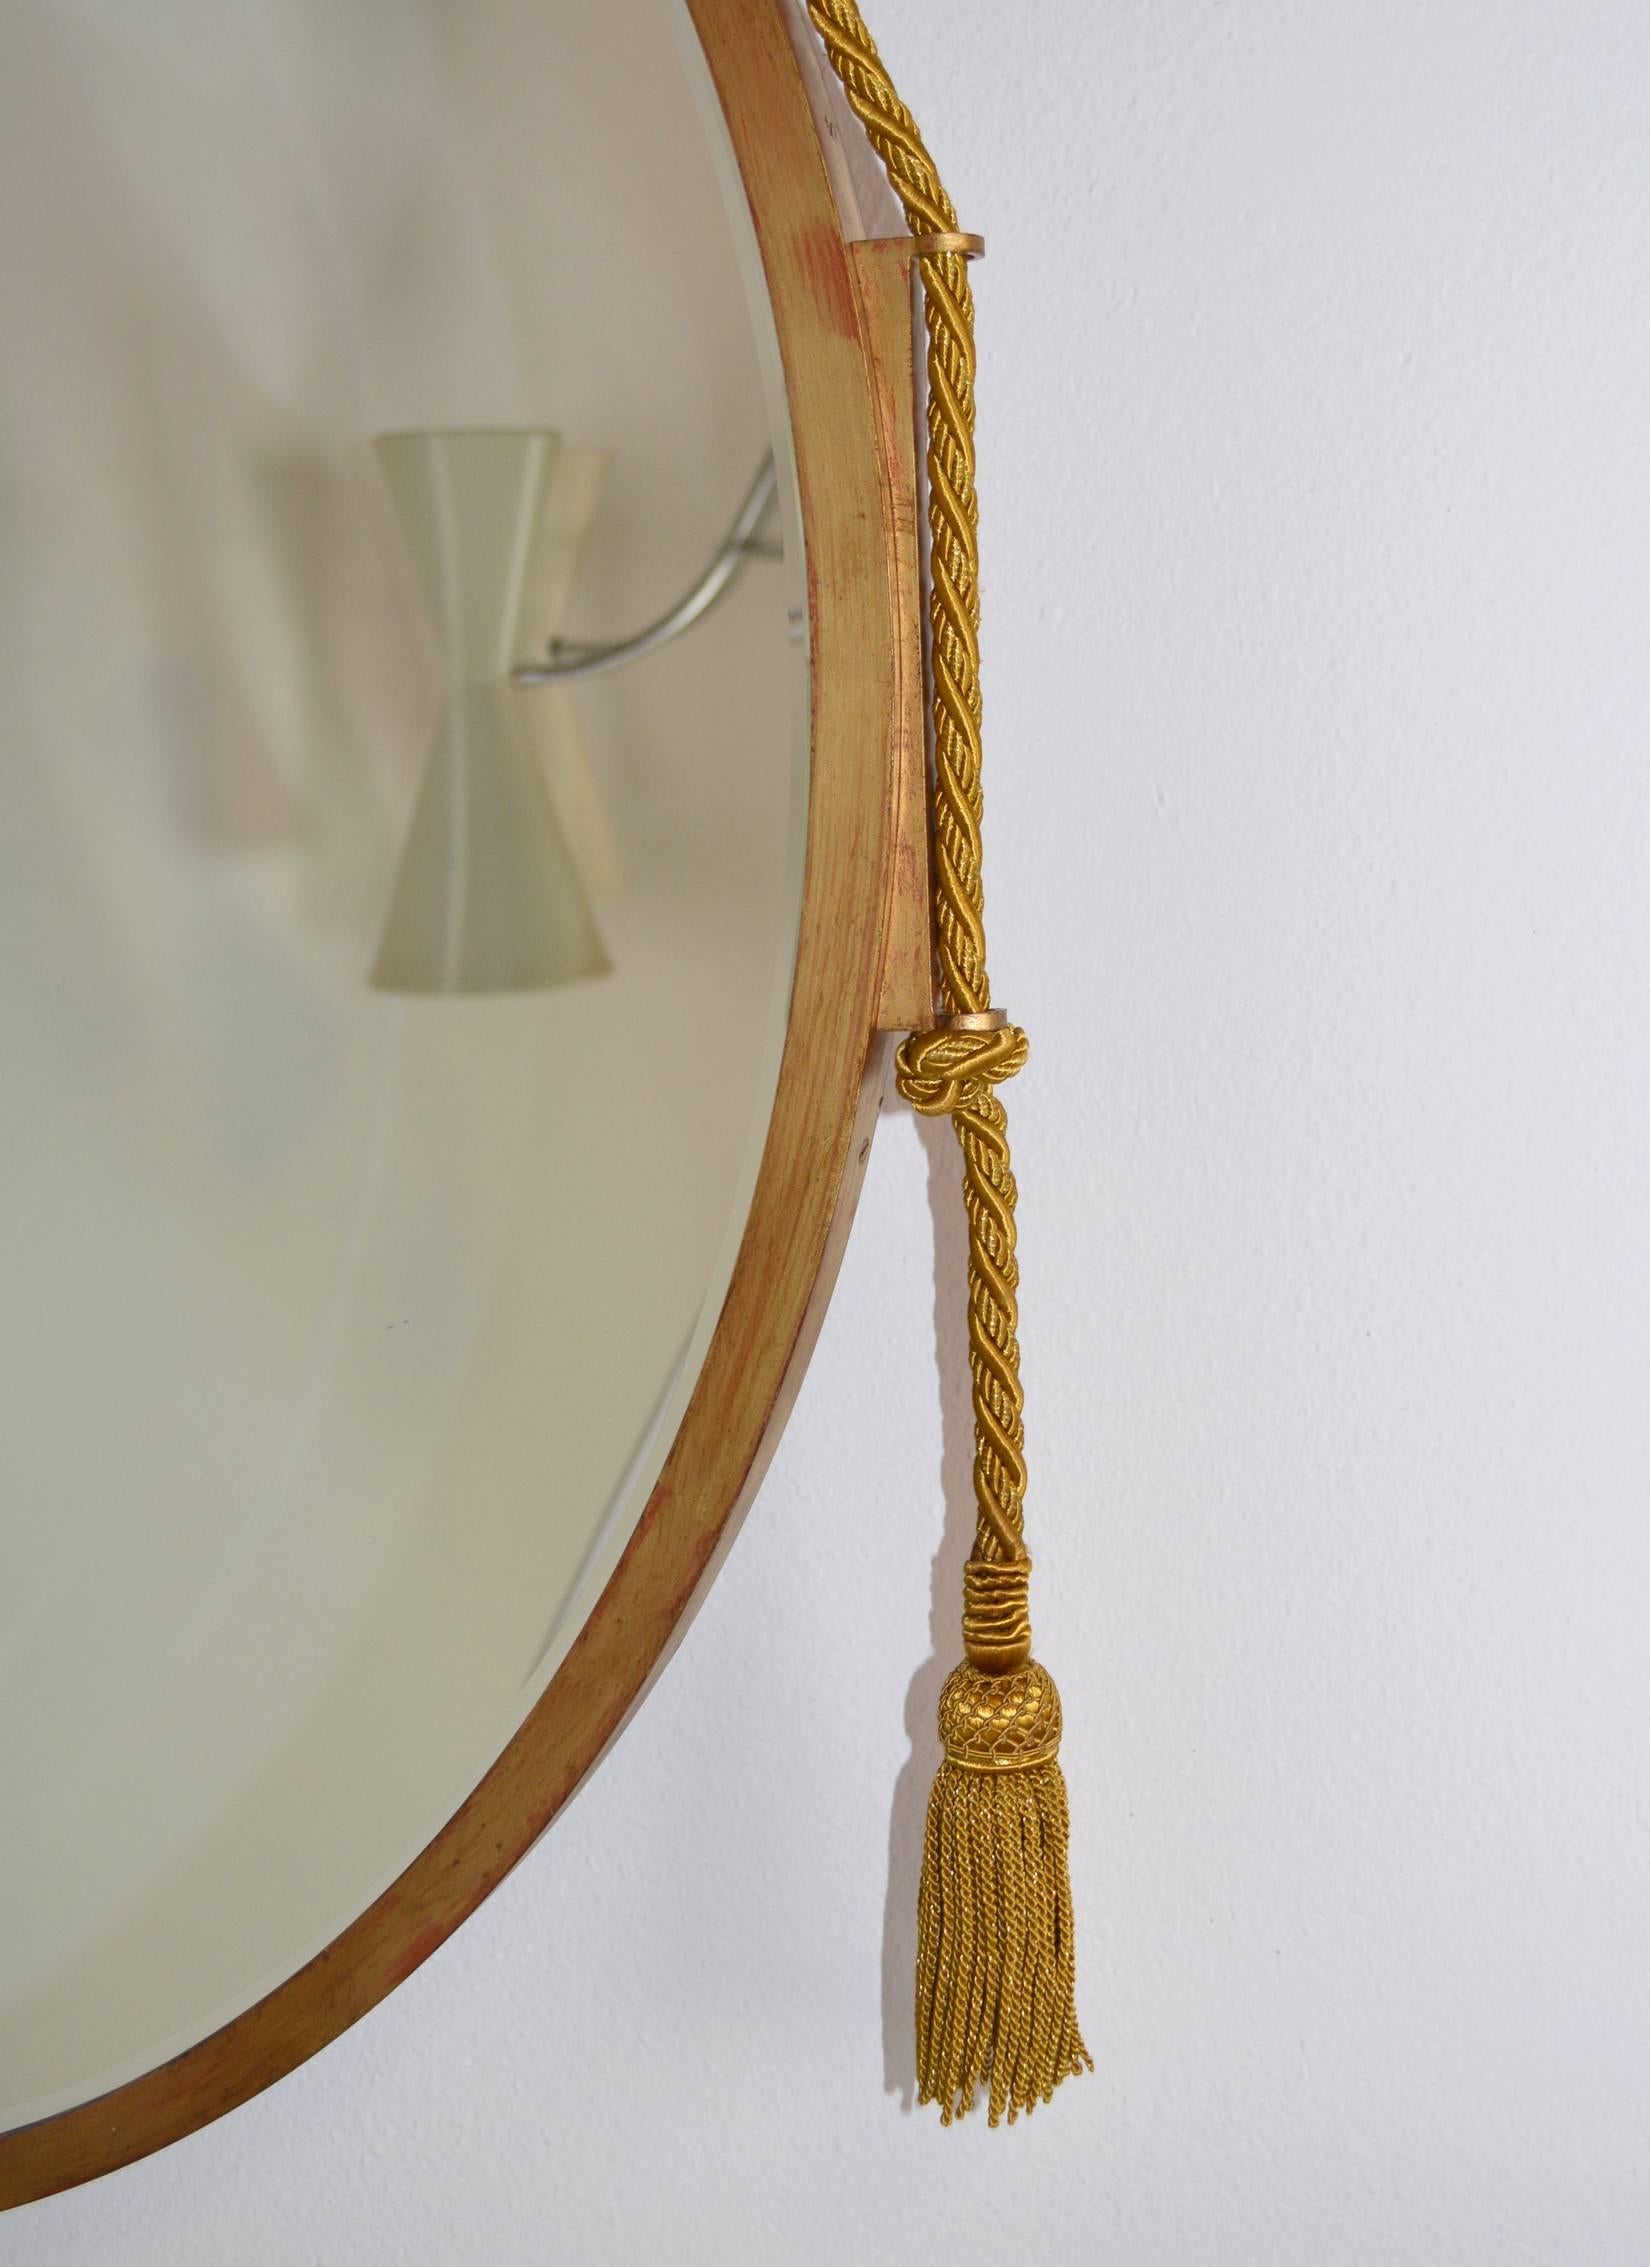 A lovely large beveled mirror with a gilt metal frame, hung on gold rope with tassel ends. In the style of Emile-Jacques Ruhlmann. Measures: 35 1/2" diameter currently hung on one rope, but can be hung from two ropes as shown in the last photo. 